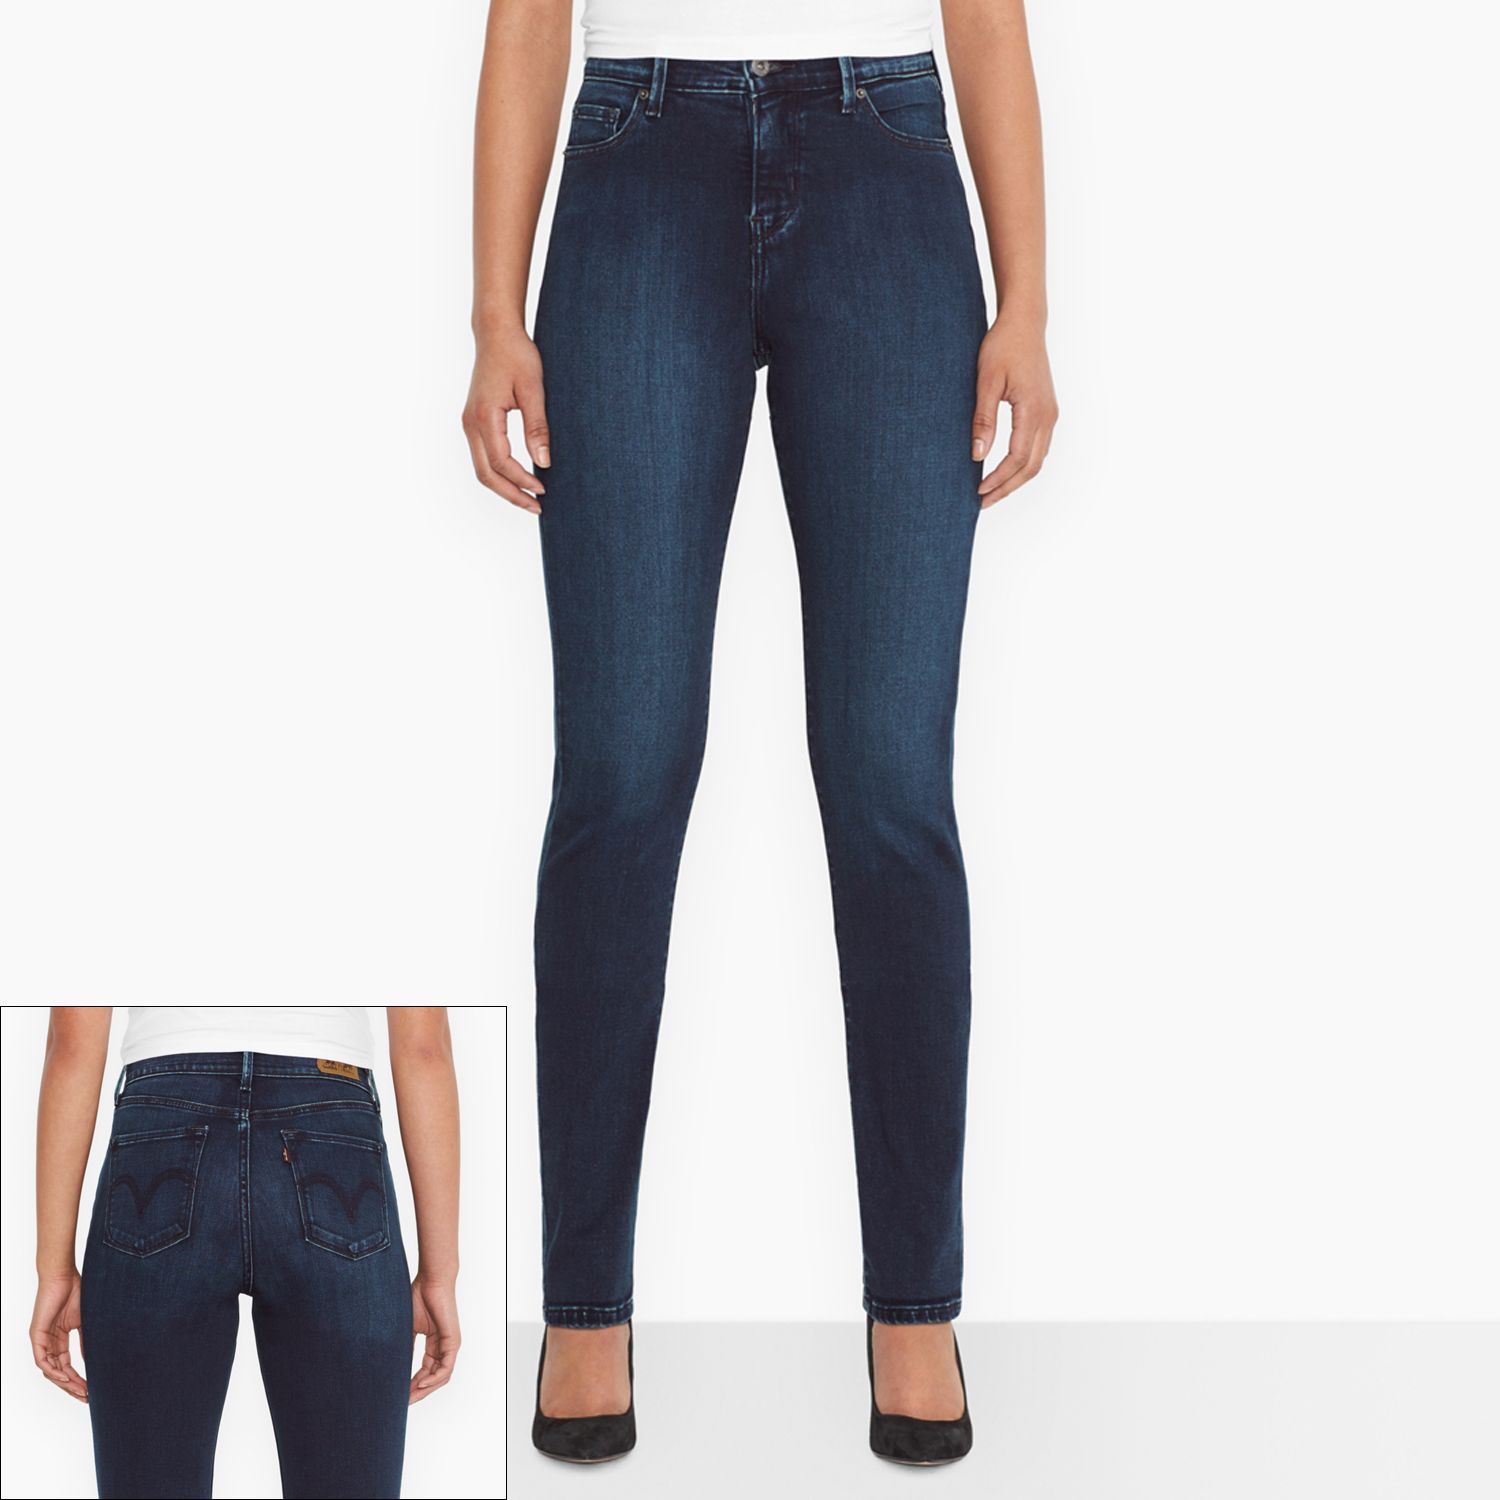 levi's 512 perfectly slimming straight leg jeans